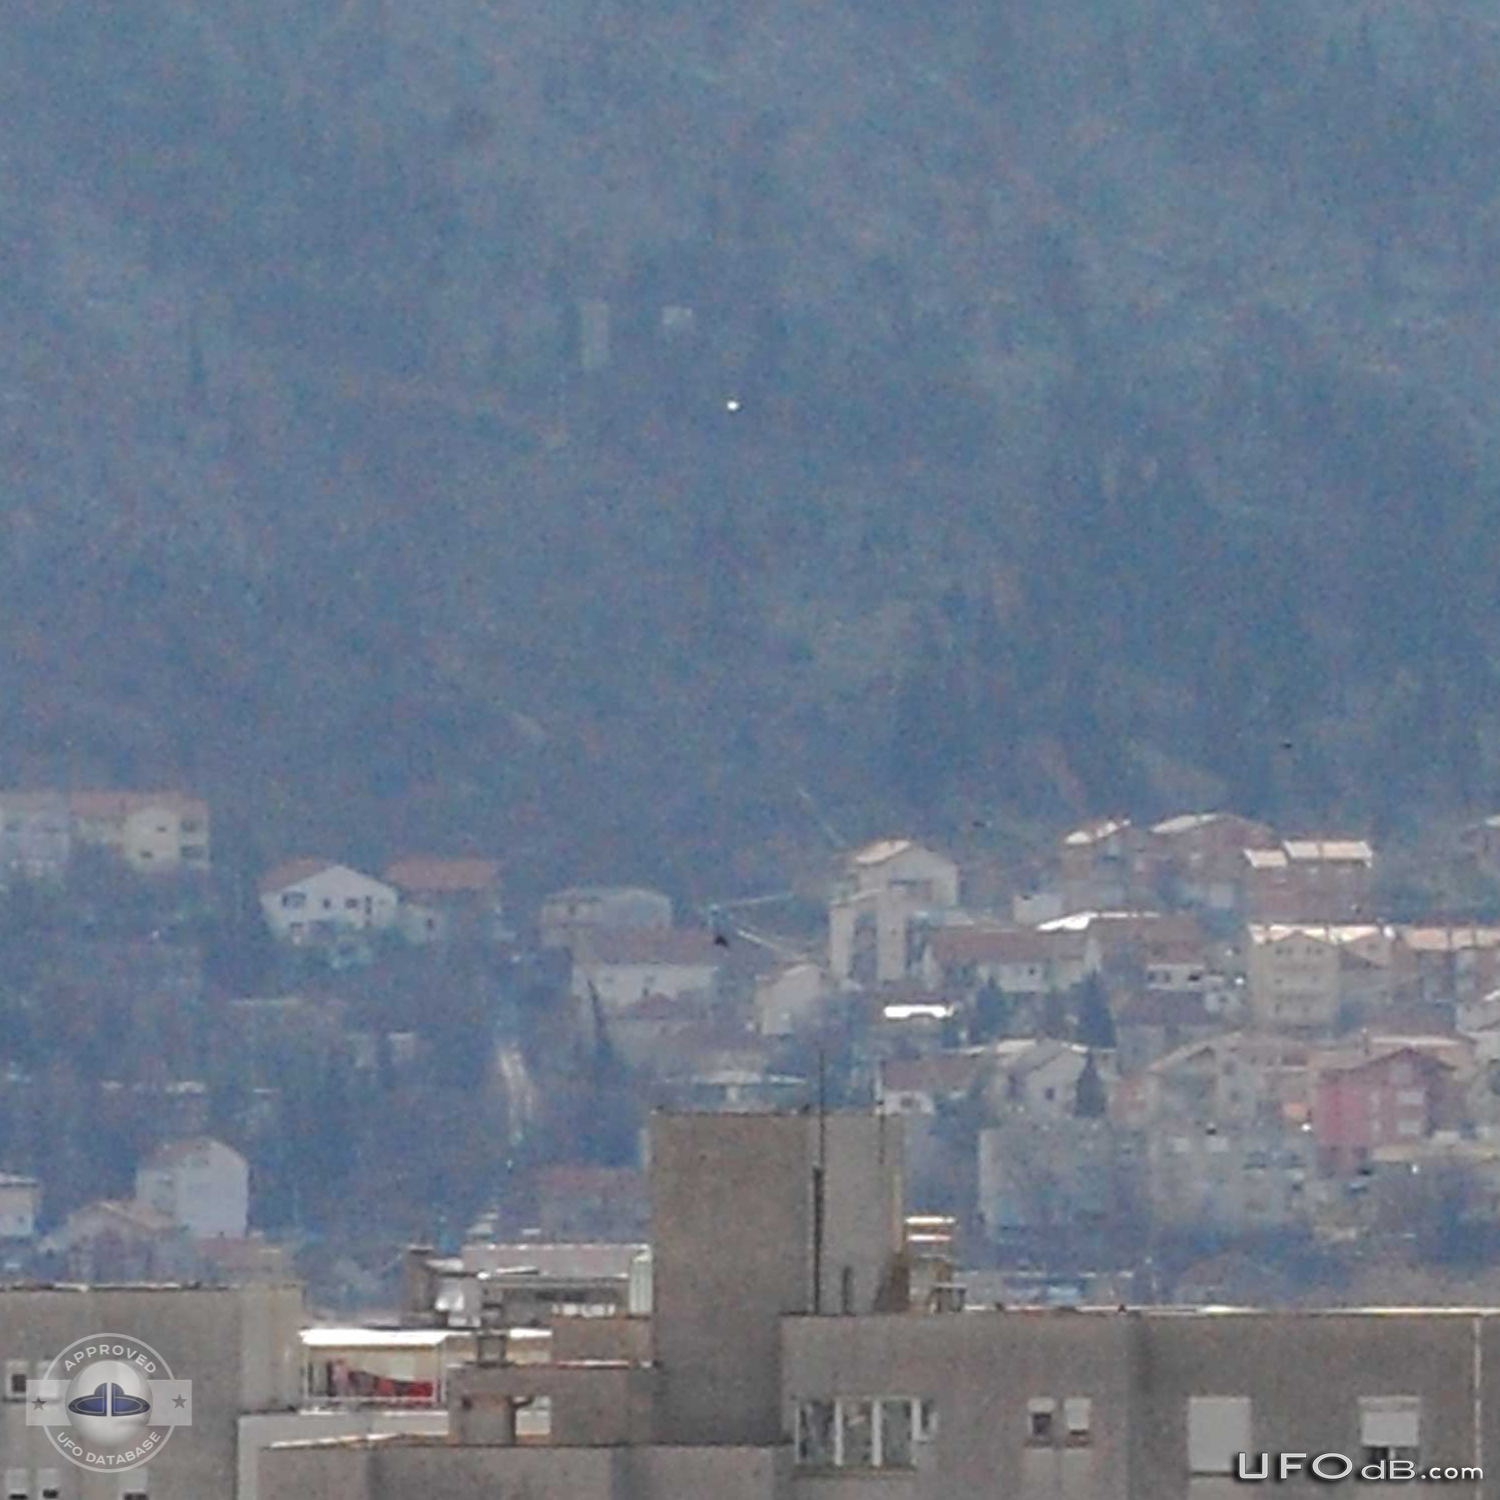 White saucer ufo over the city of Mostar in Bosnia caught on picture UFO Picture #396-1